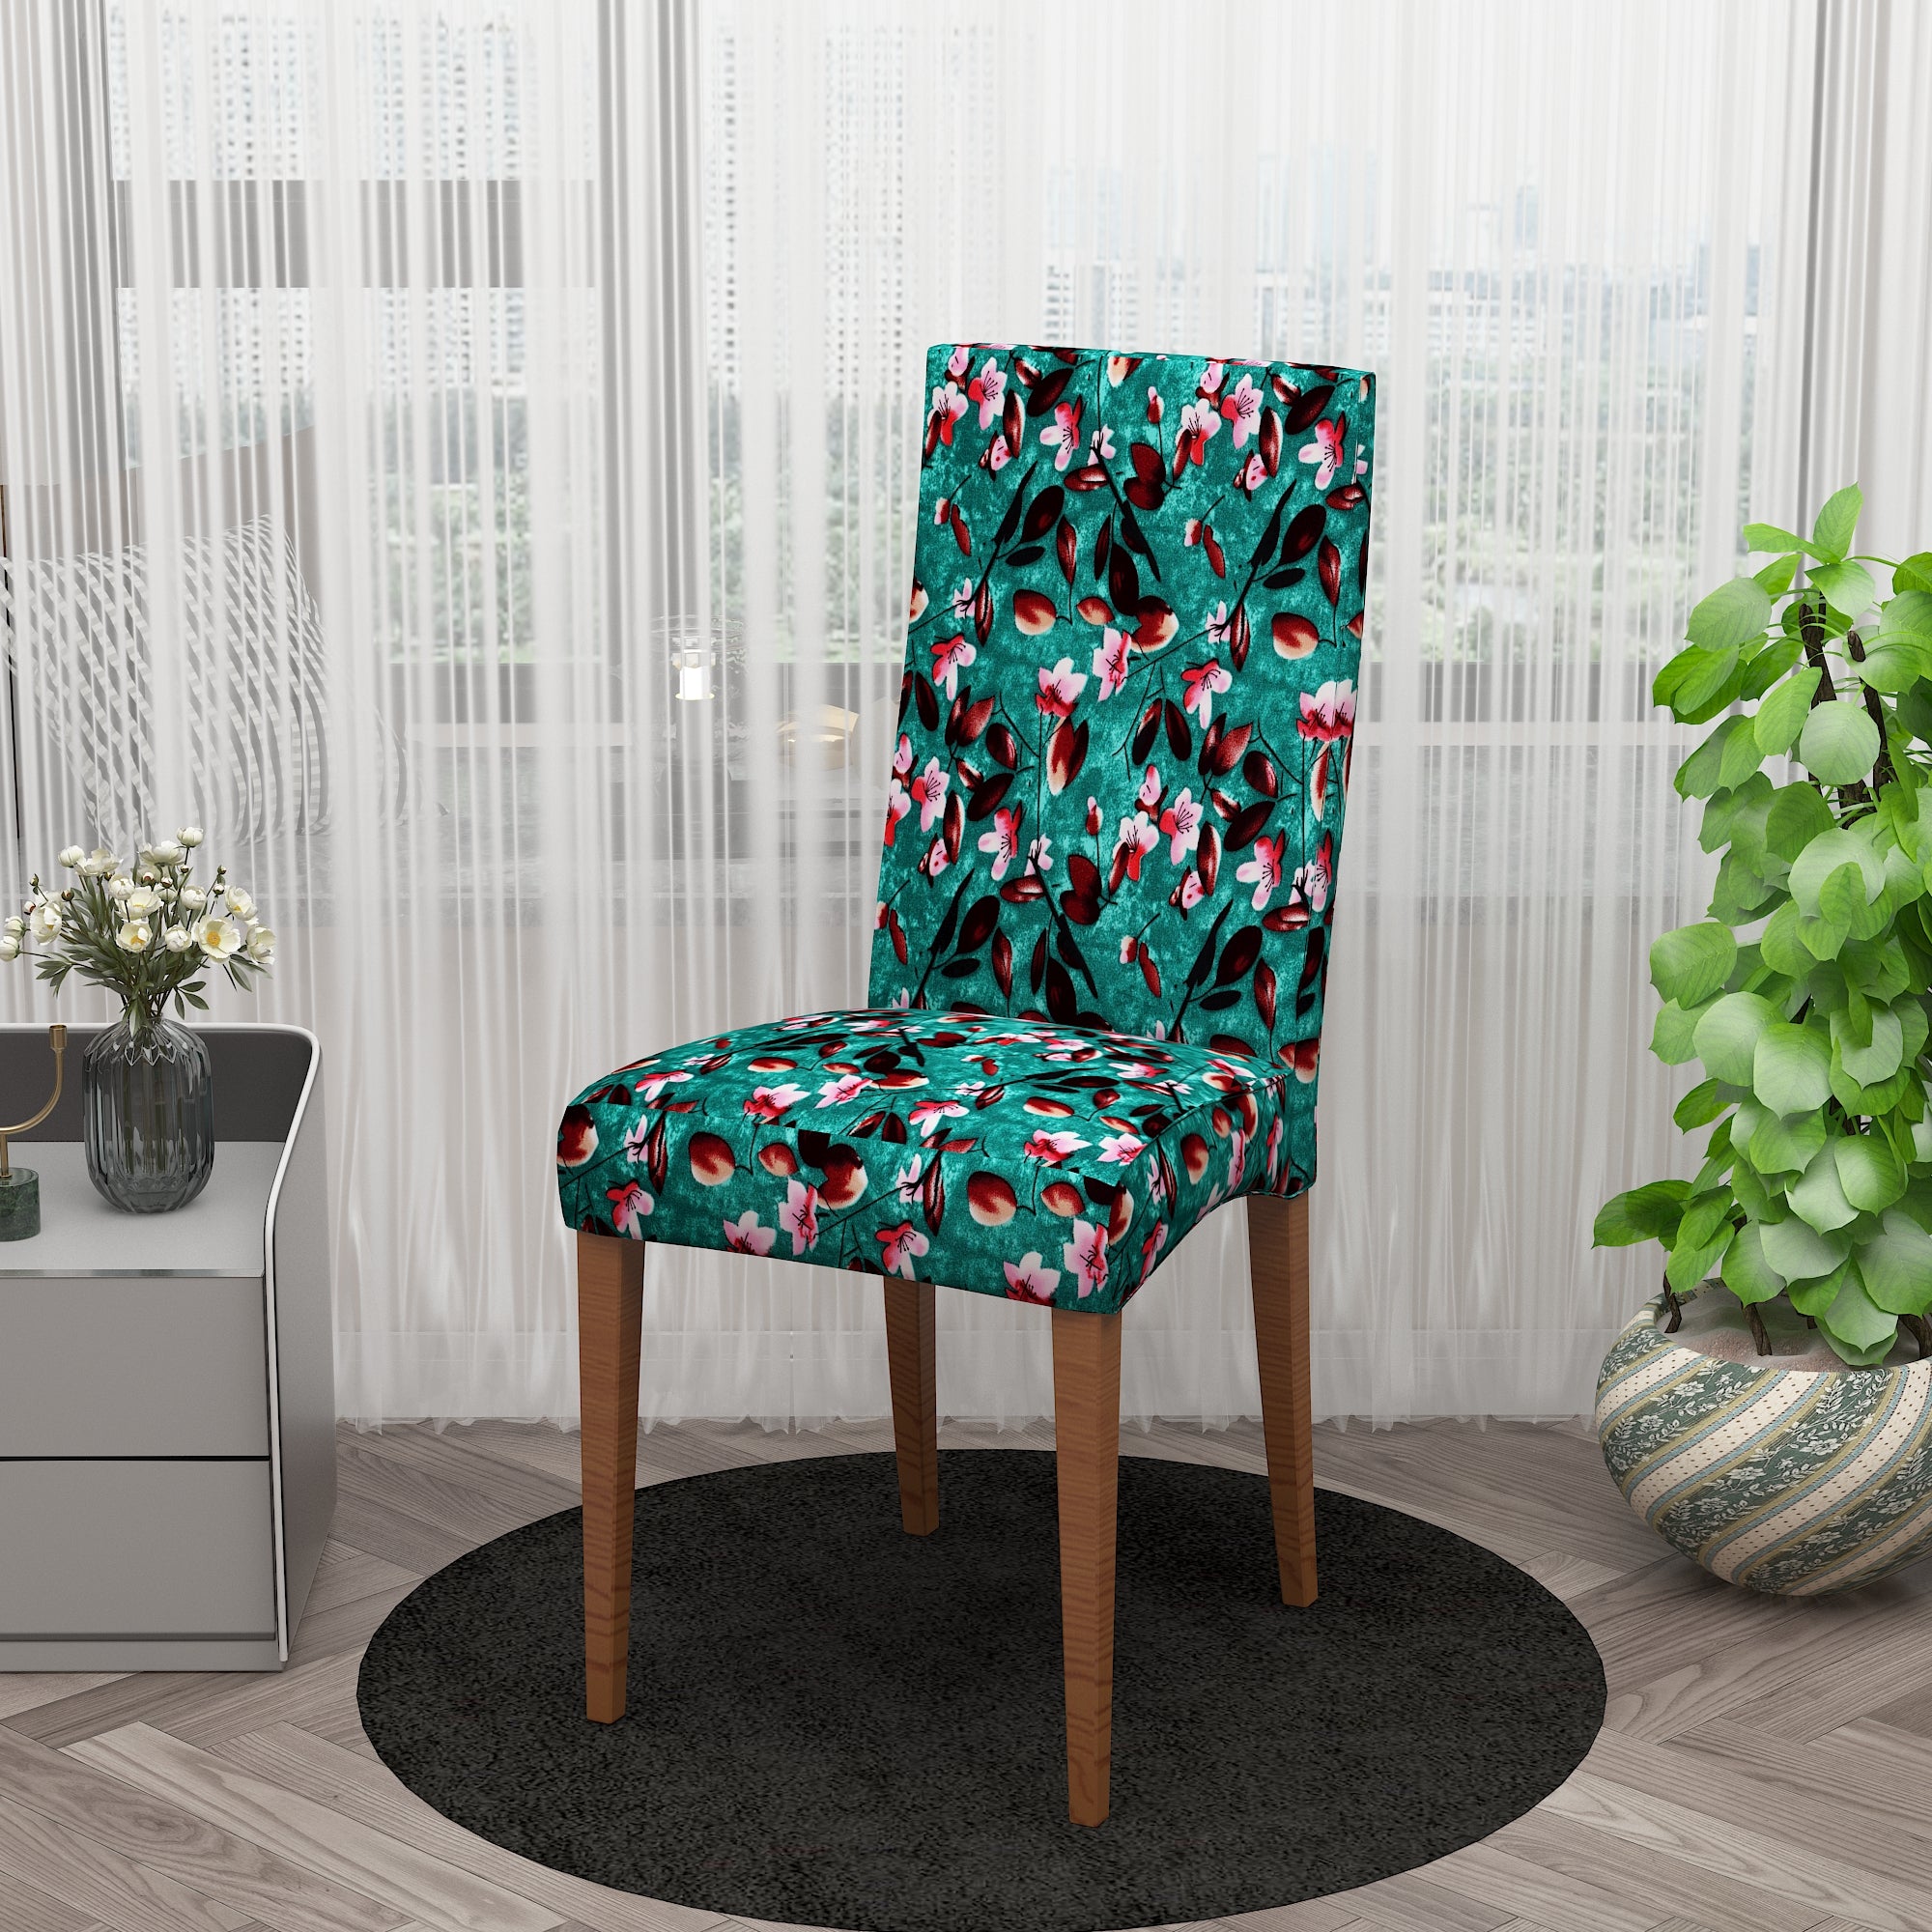 Polyester Spandex Stretchable Printed Chair Cover, MG11